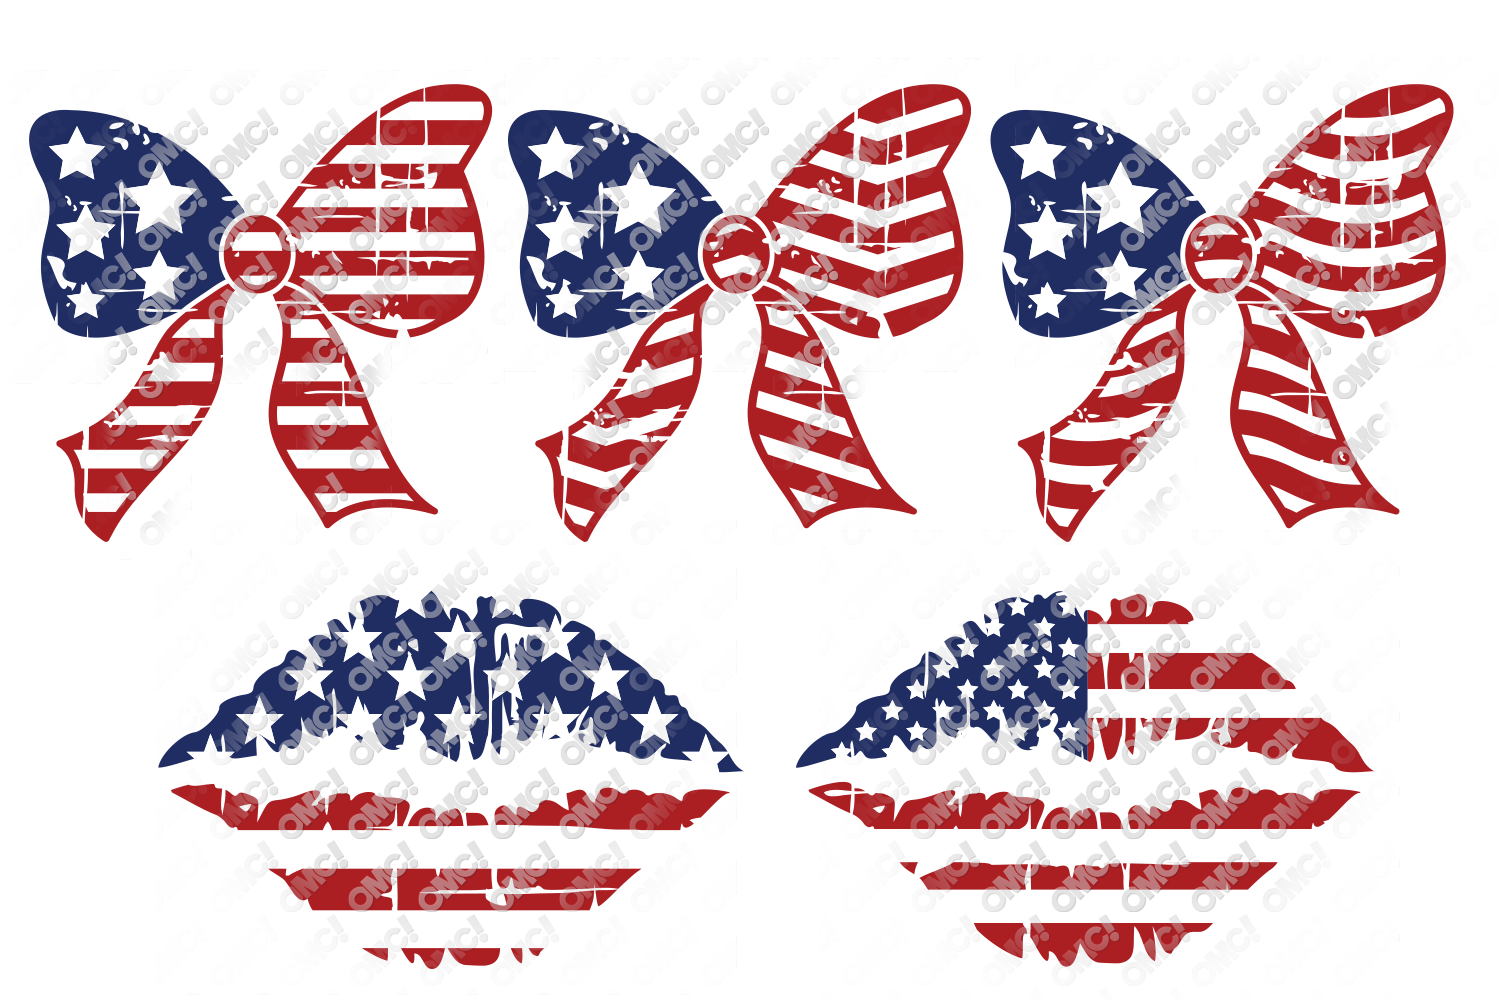 Distressed American Flag SVG in SVG, DXF, PNG, EPS, JPEG